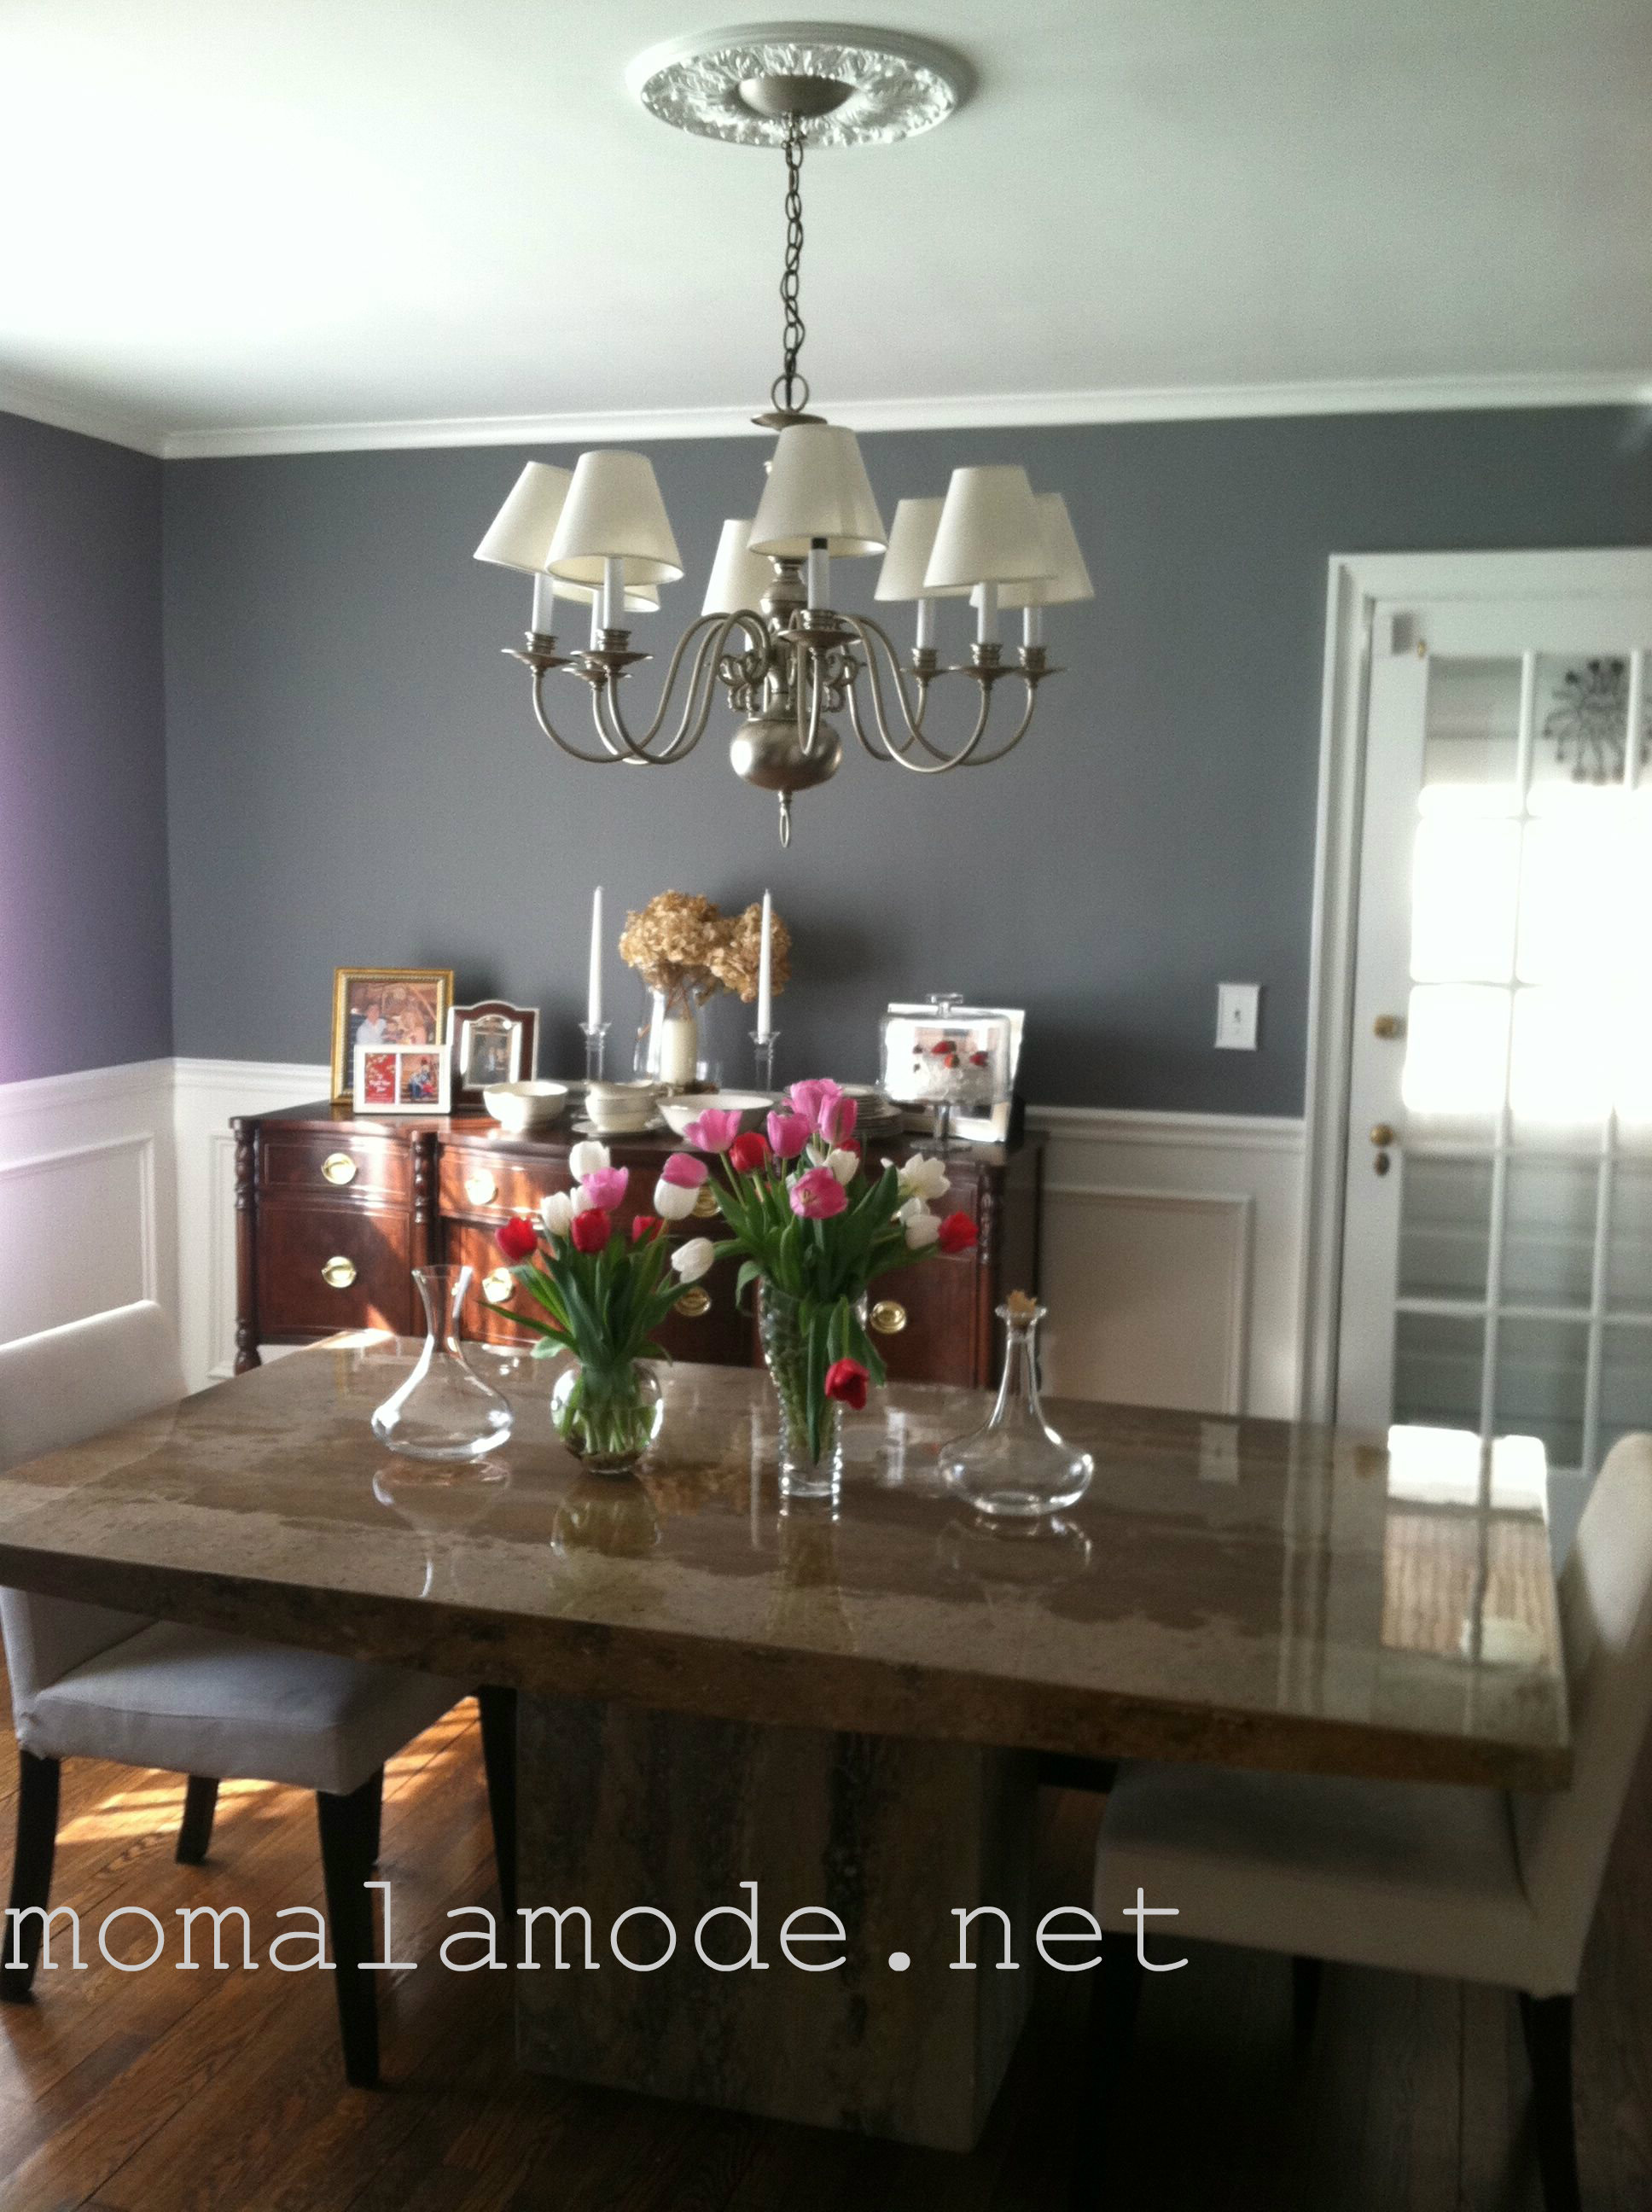 Almost finished product: my great gray dining room